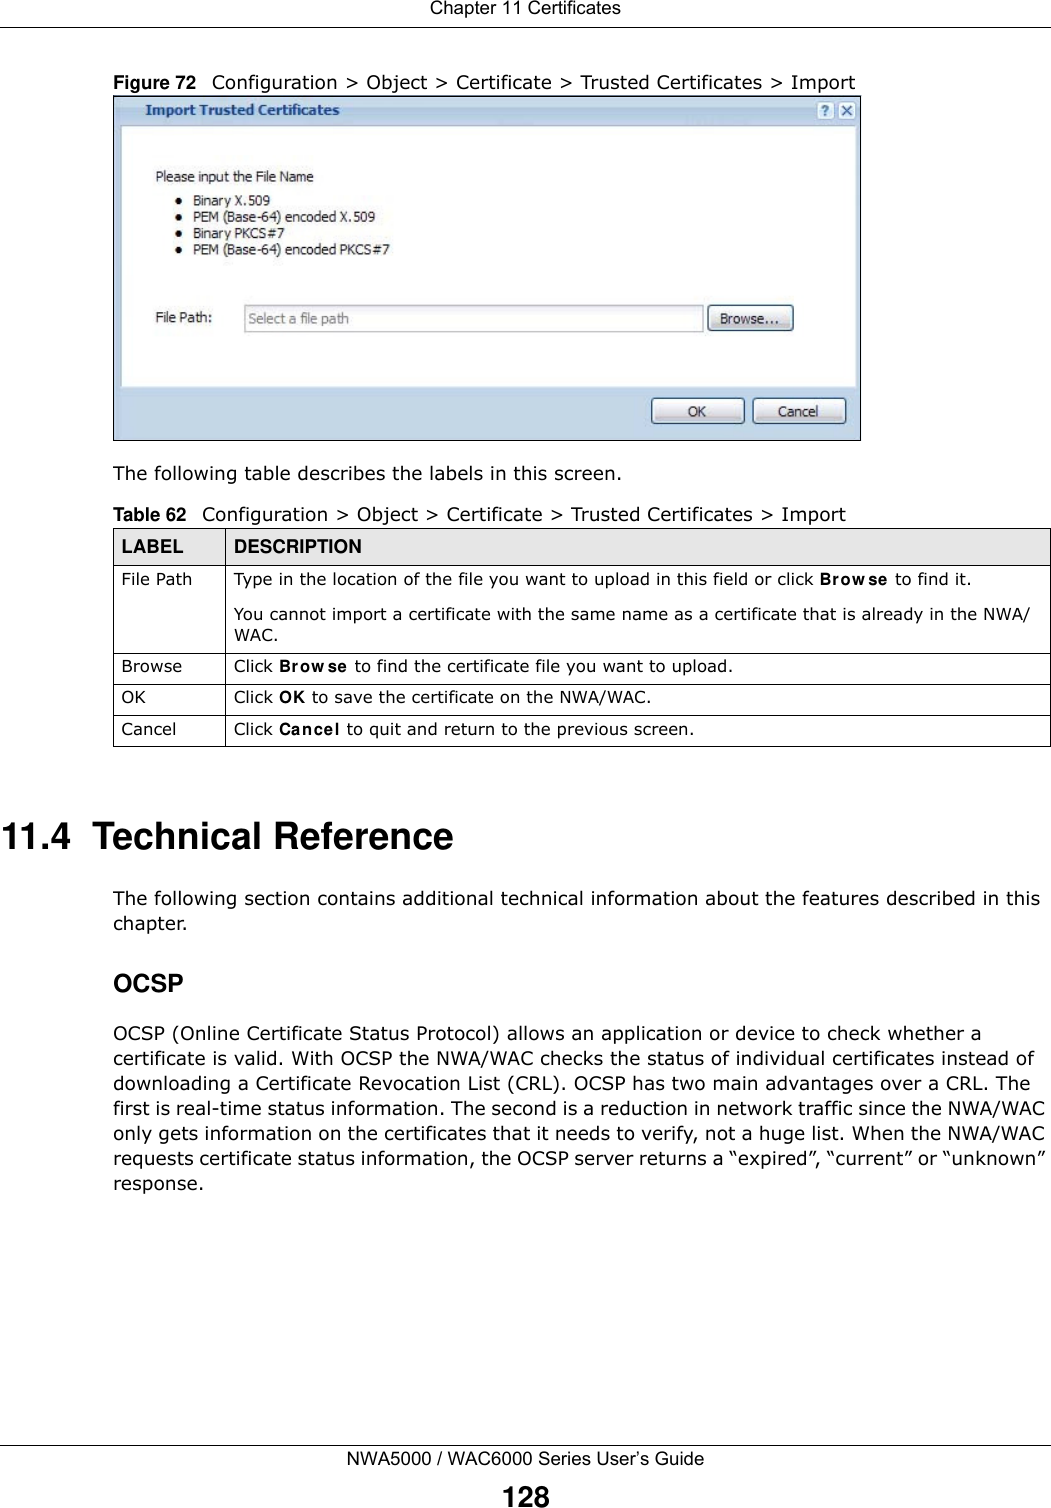 Chapter 11 CertificatesNWA5000 / WAC6000 Series User’s Guide128Figure 72   Configuration &gt; Object &gt; Certificate &gt; Trusted Certificates &gt; ImportThe following table describes the labels in this screen. 11.4  Technical ReferenceThe following section contains additional technical information about the features described in this chapter.OCSPOCSP (Online Certificate Status Protocol) allows an application or device to check whether a certificate is valid. With OCSP the NWA/WAC checks the status of individual certificates instead of downloading a Certificate Revocation List (CRL). OCSP has two main advantages over a CRL. The first is real-time status information. The second is a reduction in network traffic since the NWA/WAC only gets information on the certificates that it needs to verify, not a huge list. When the NWA/WAC requests certificate status information, the OCSP server returns a “expired”, “current” or “unknown” response.Table 62   Configuration &gt; Object &gt; Certificate &gt; Trusted Certificates &gt; ImportLABEL DESCRIPTIONFile Path  Type in the location of the file you want to upload in this field or click Browse to find it.You cannot import a certificate with the same name as a certificate that is already in the NWA/WAC.Browse Click Browse to find the certificate file you want to upload. OK Click OK to save the certificate on the NWA/WAC.Cancel Click Cancel to quit and return to the previous screen.